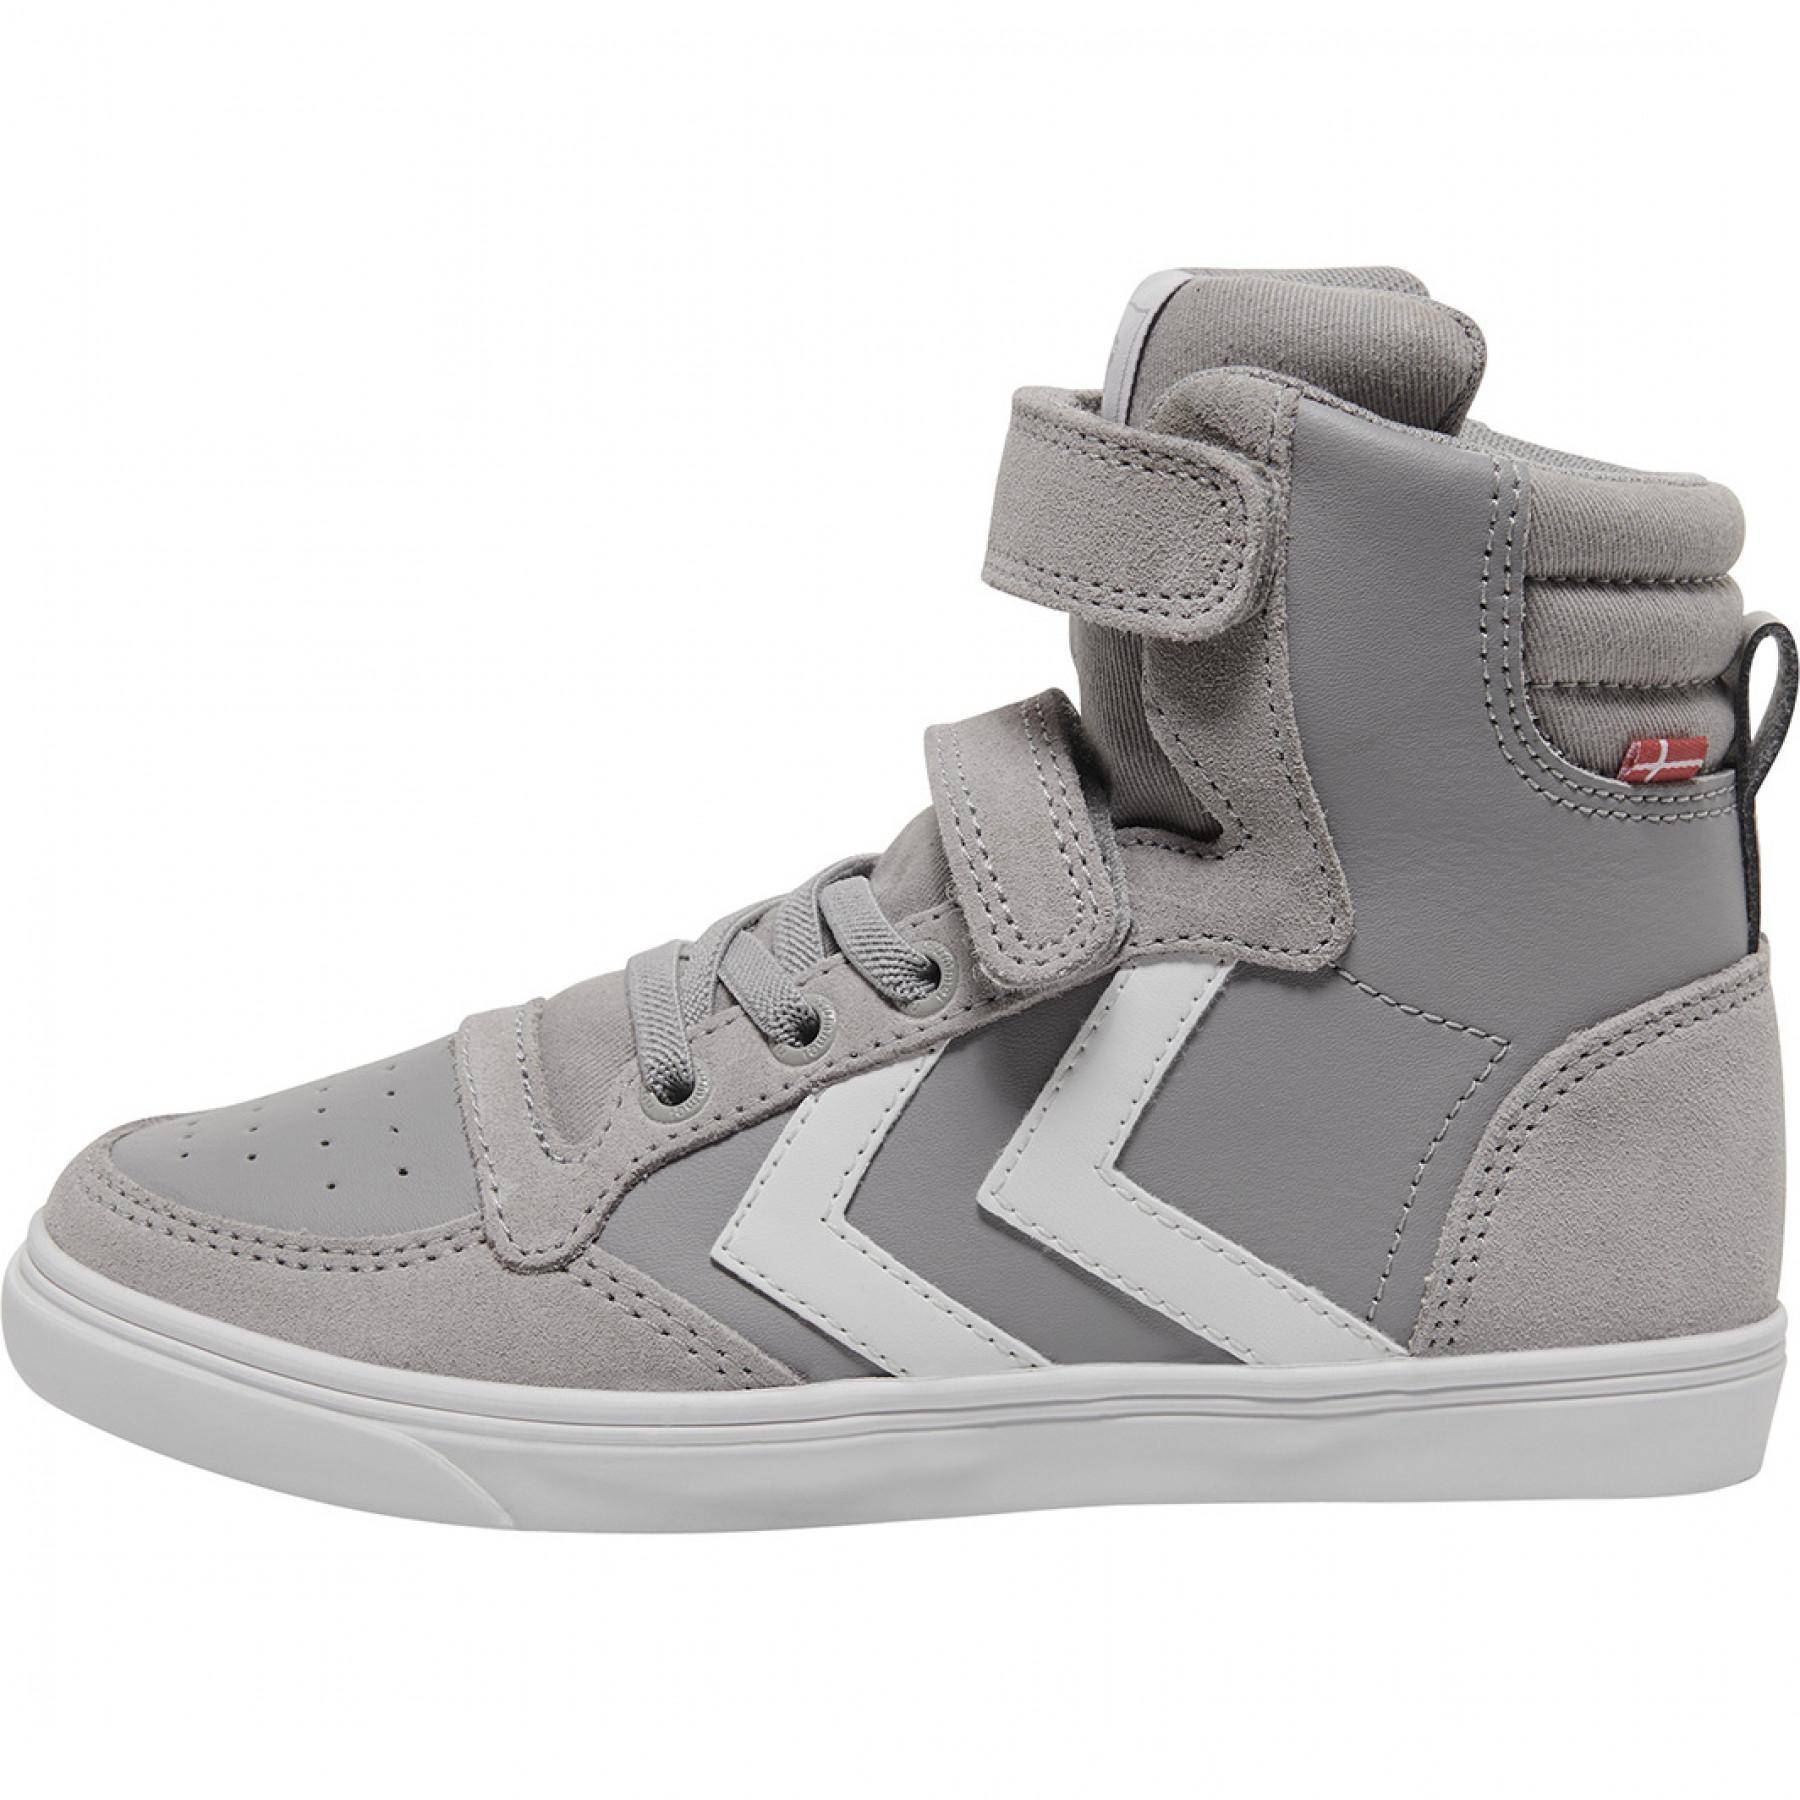 Children's sneakers Hummel stadil leather high - Brands - Lifestyle